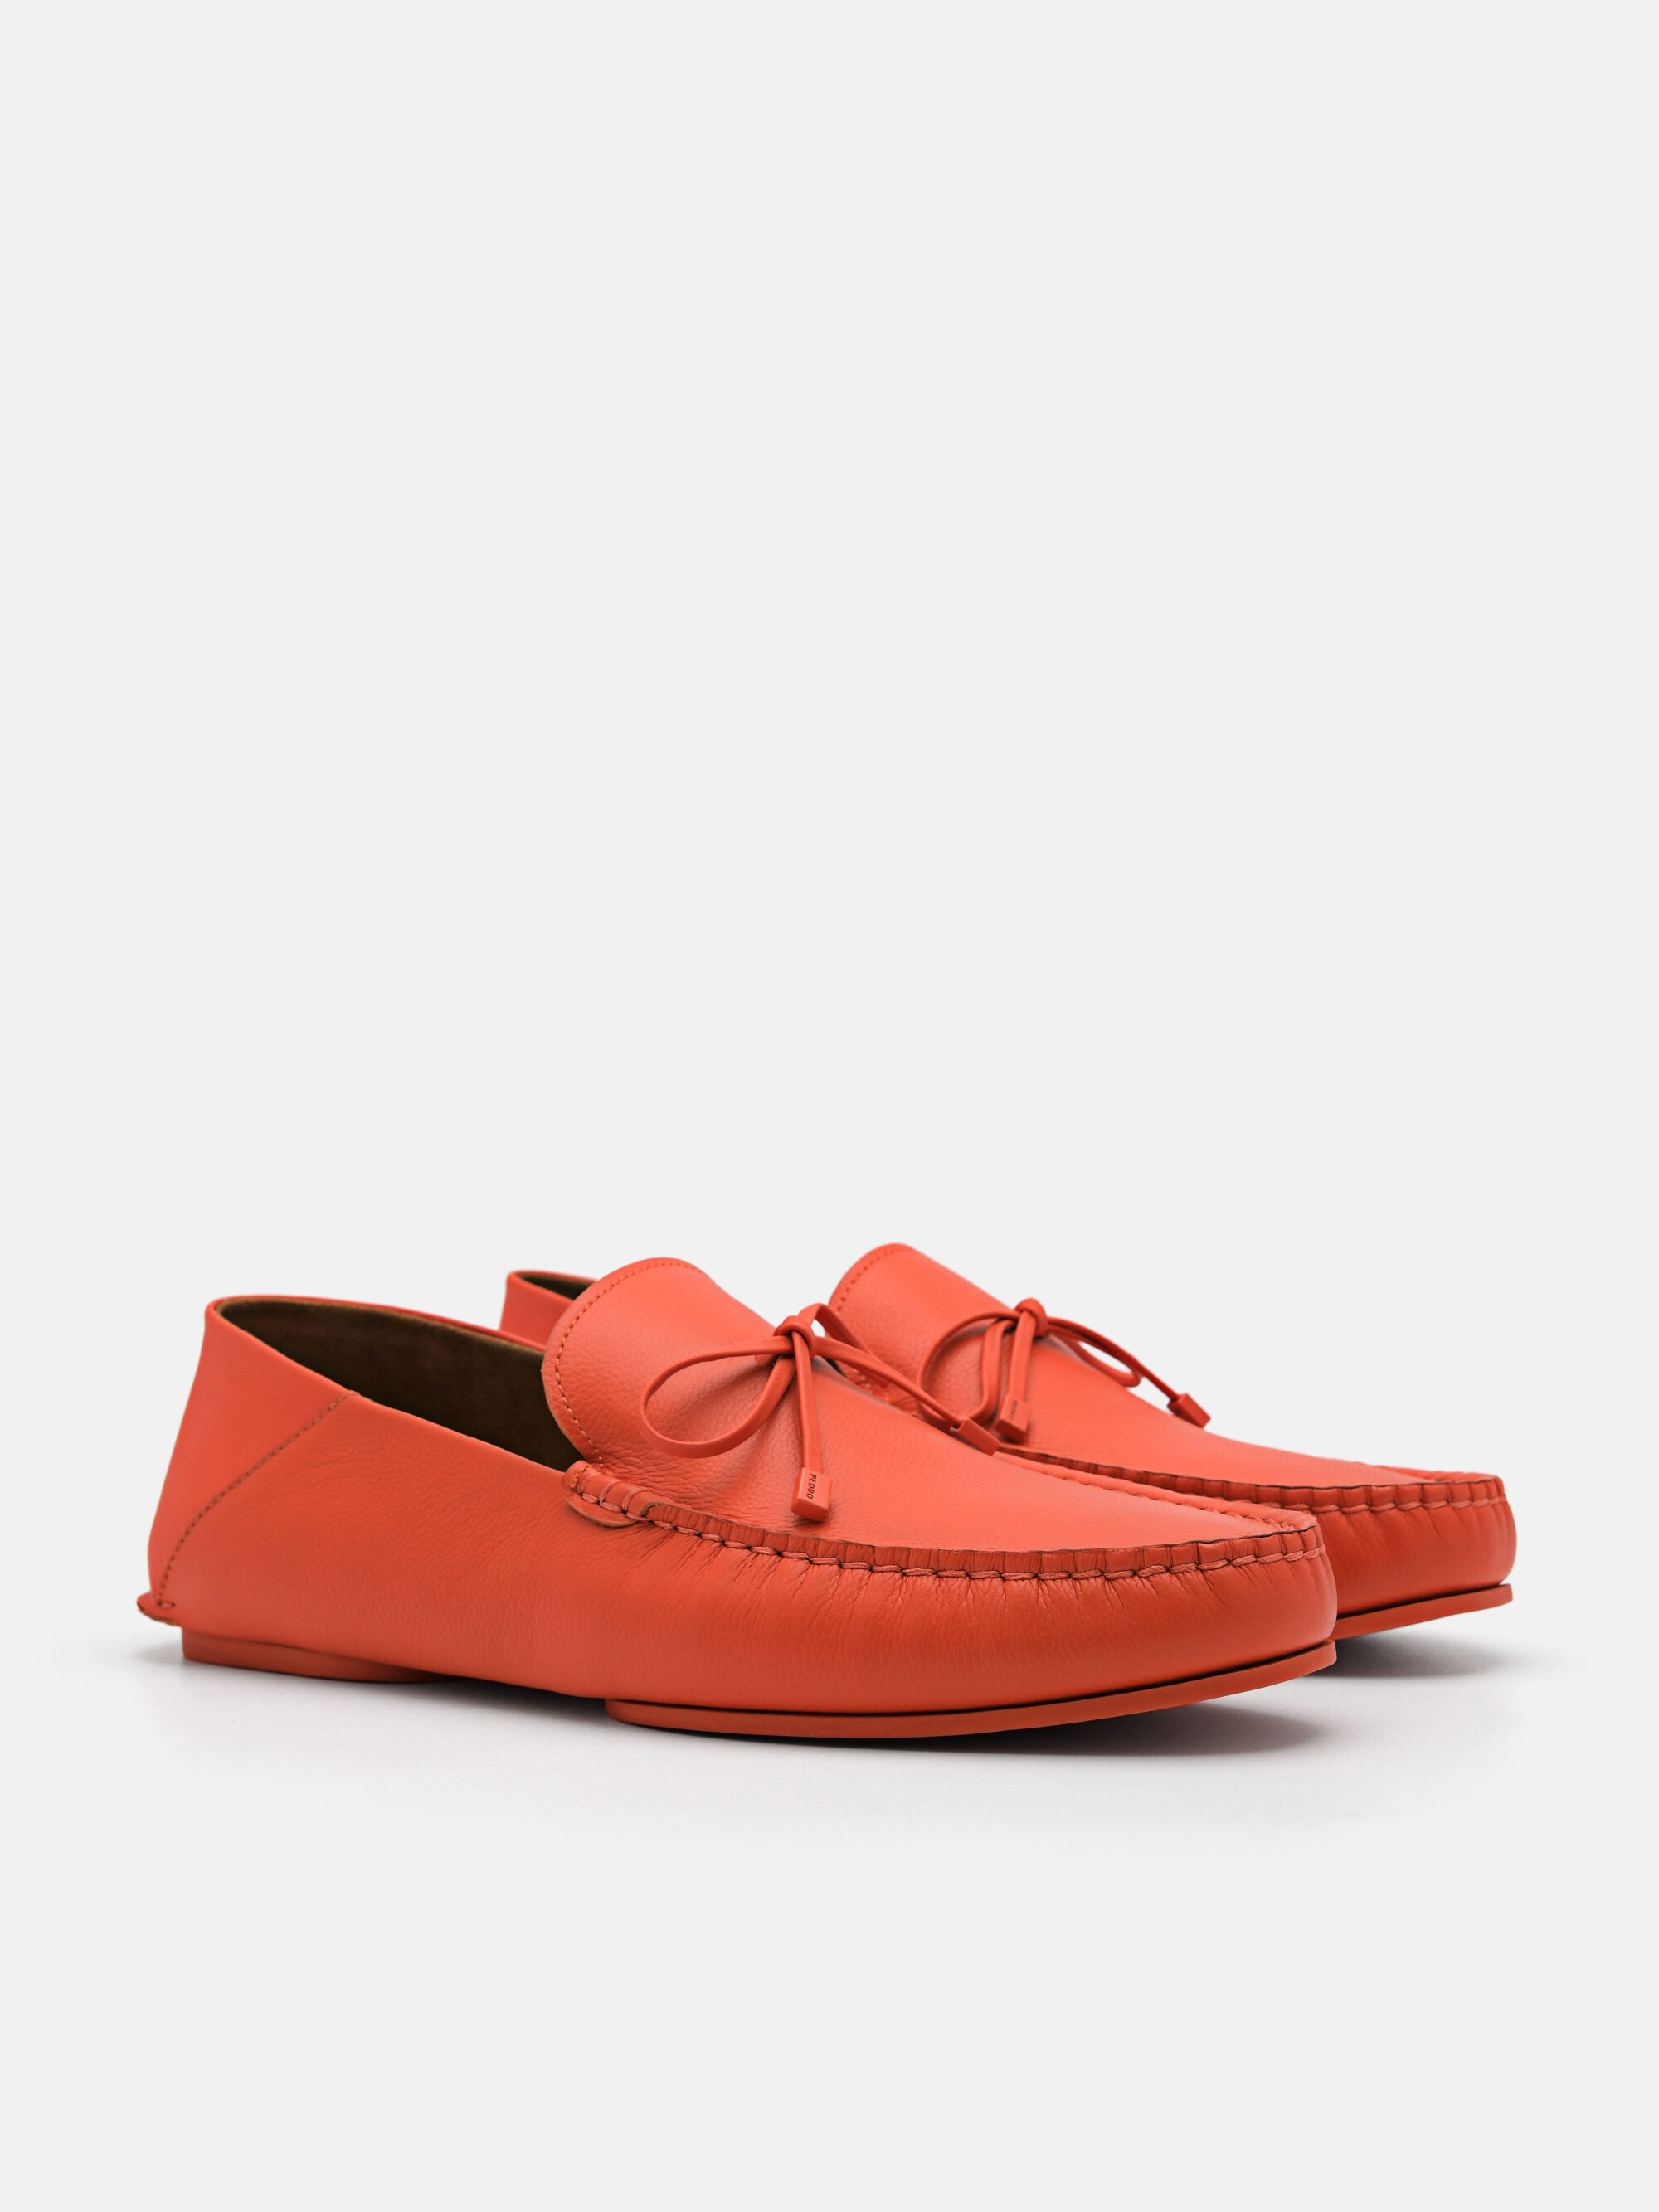 Leto Leather Driving Shoes, Orange